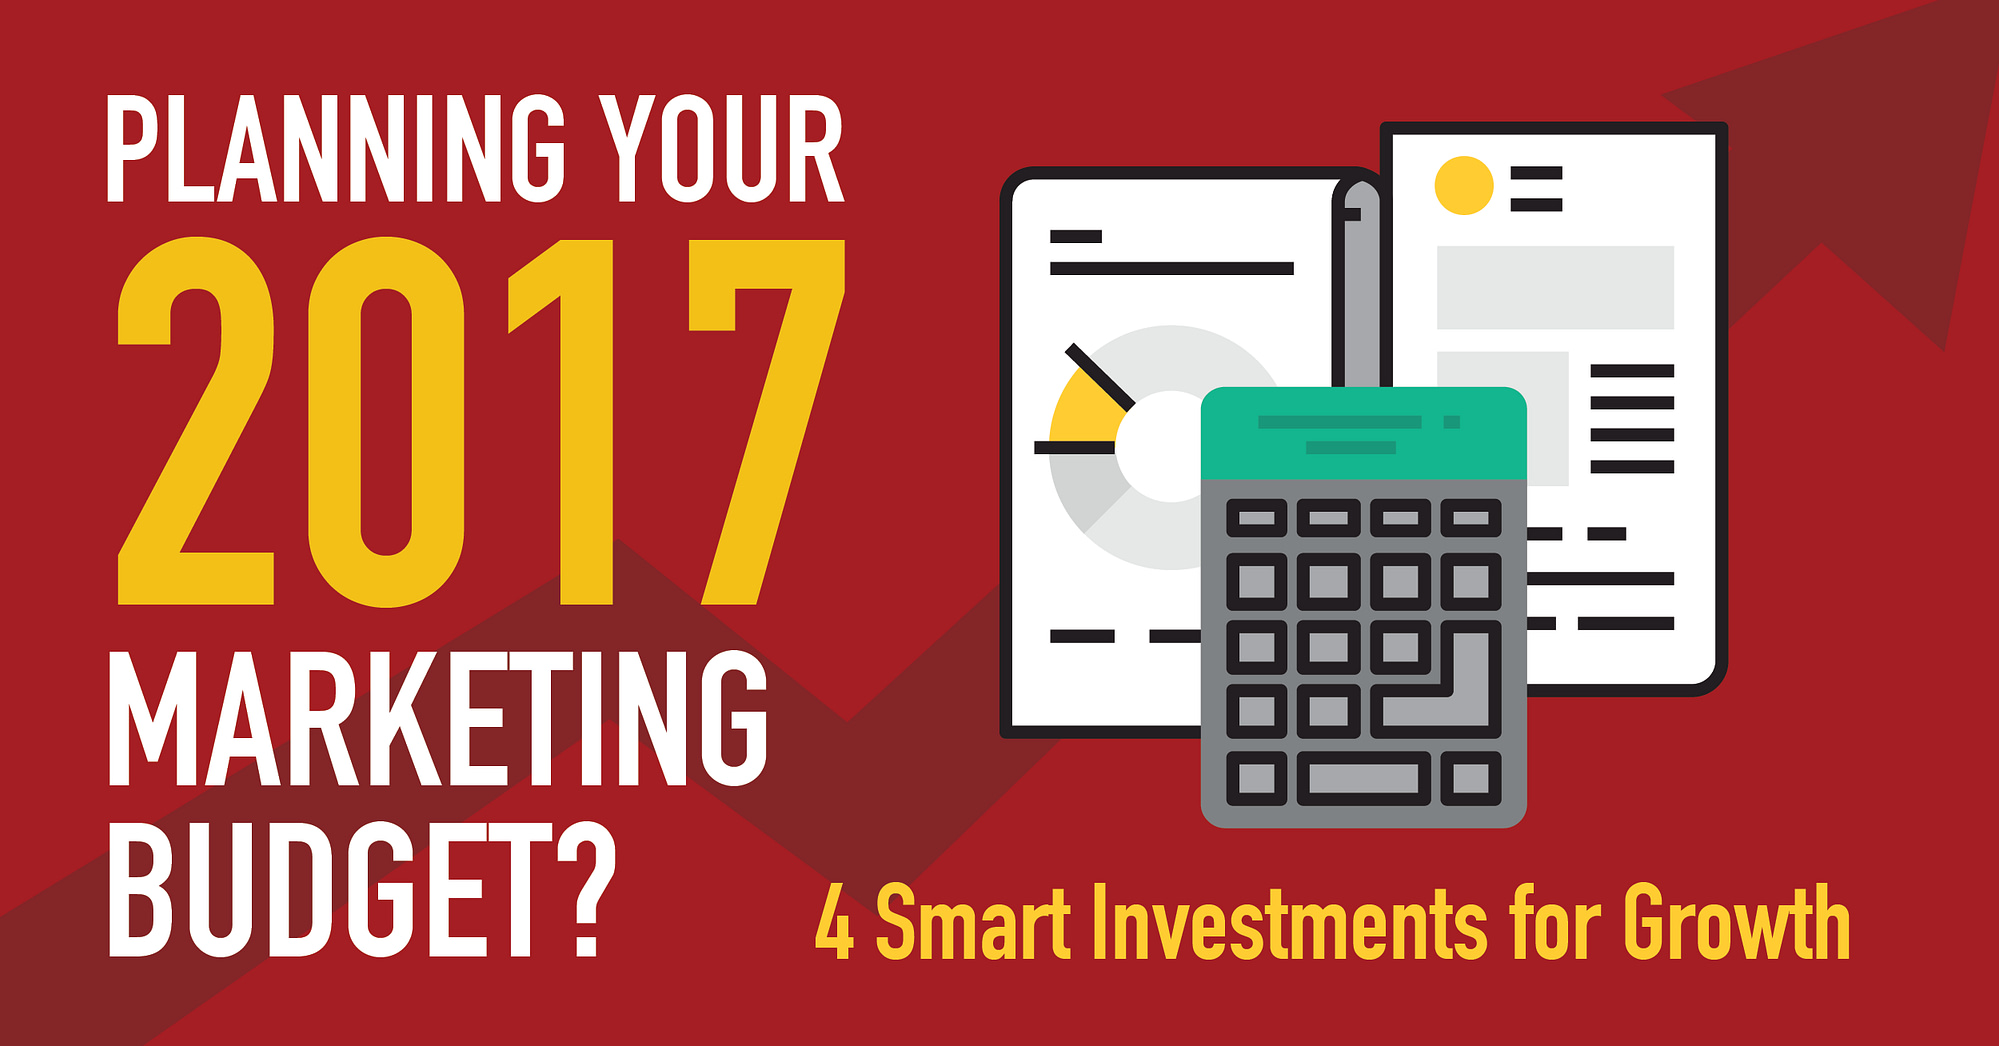 Planning Your B2B Marketing Budget? 4 Smart Investments for Growth